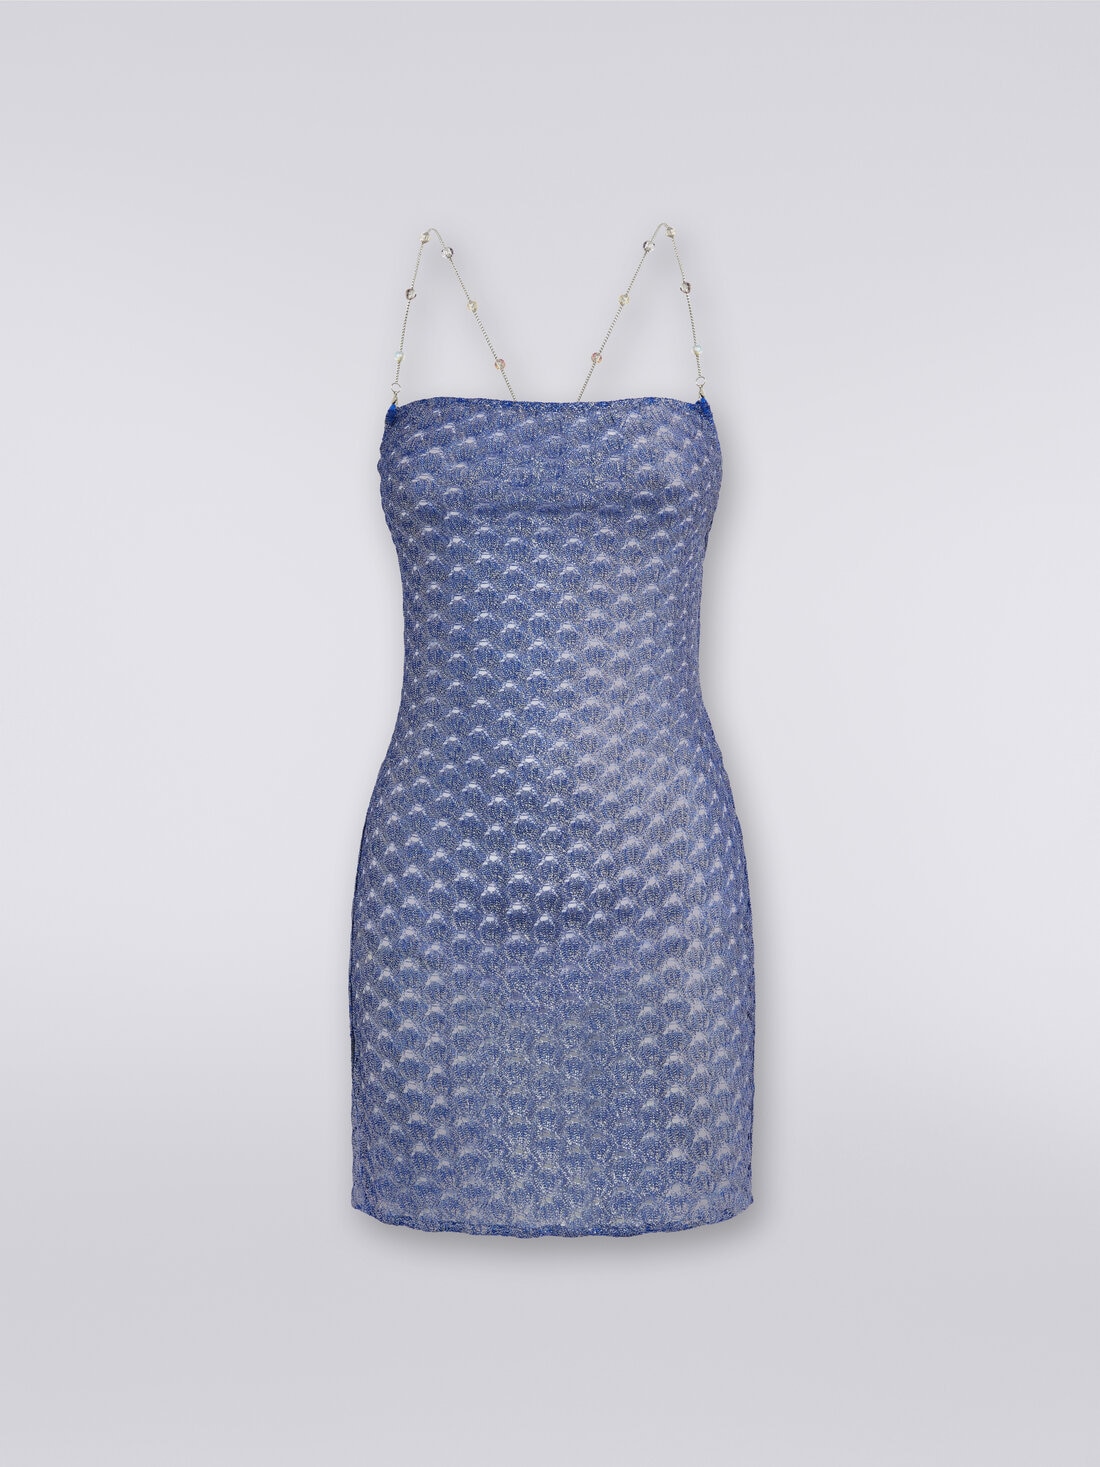 Lace-effect cover up dress with chain and gem straps, Blue - MS24SQ00BR00TC94045 - 0